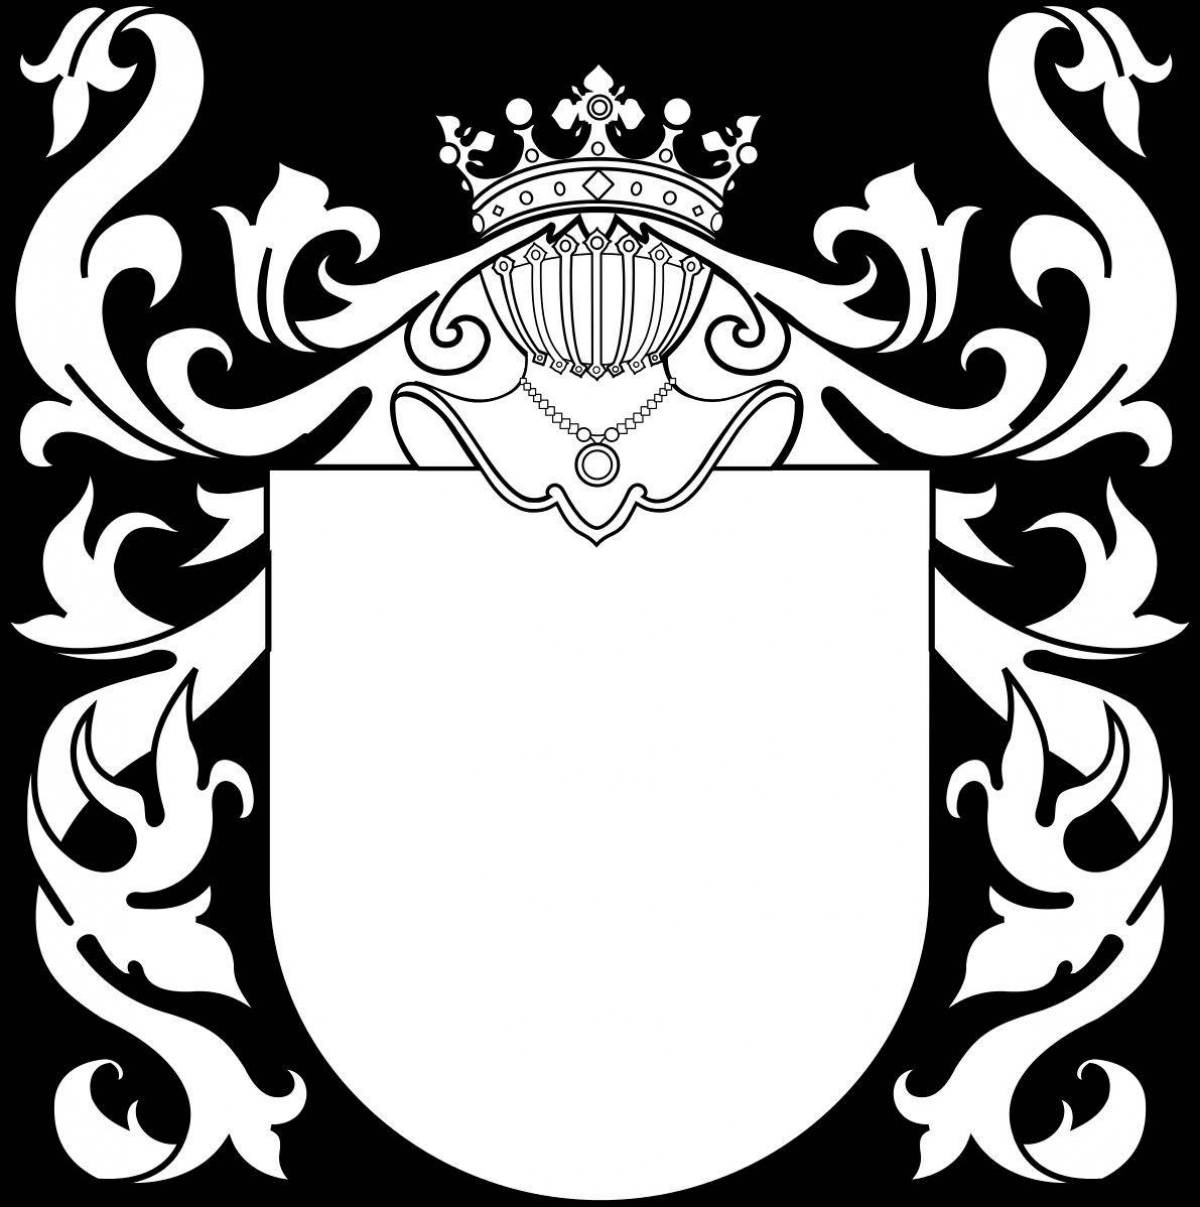 Family coat of arms glamor coloring book